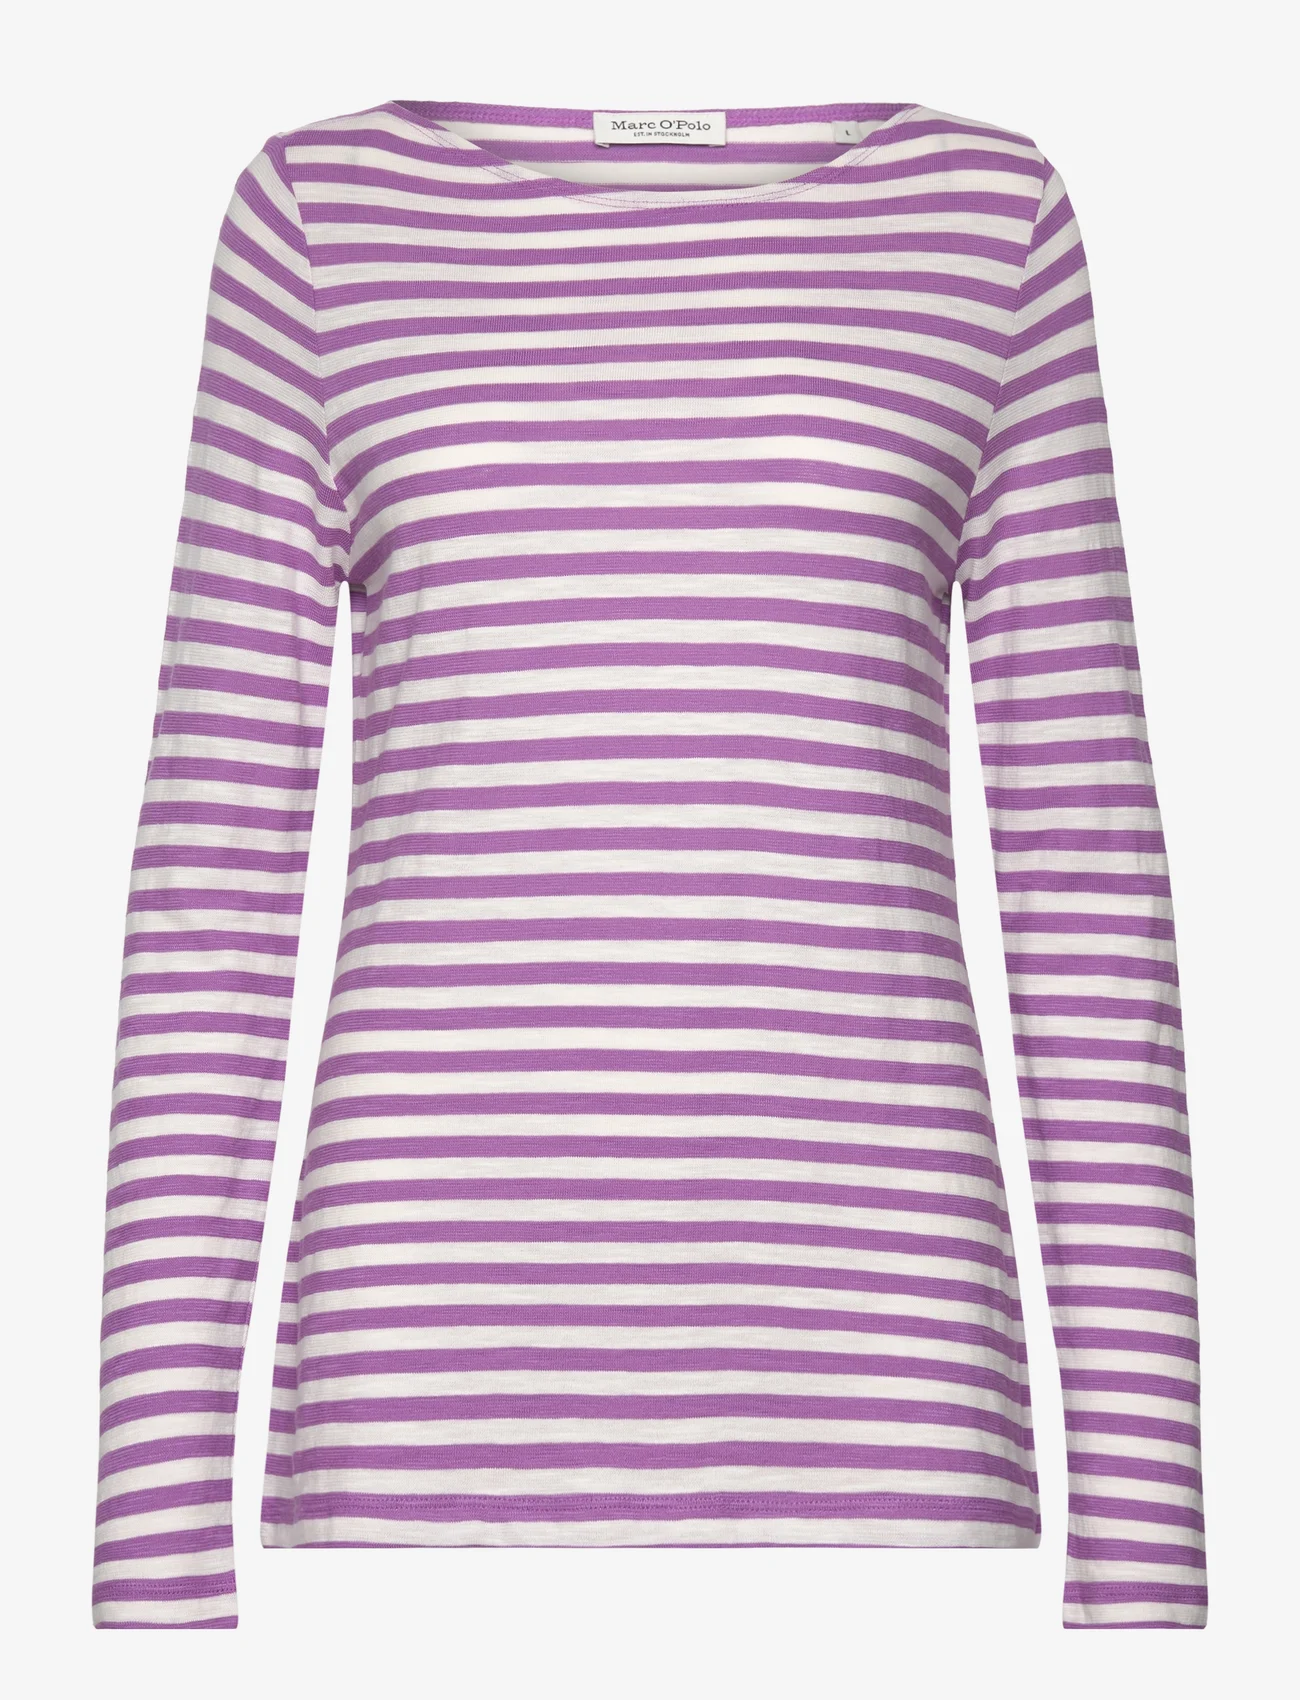 Marc O'Polo - T-SHIRTS LONG SLEEVE - langermede topper - multi/ wild lilac - 0